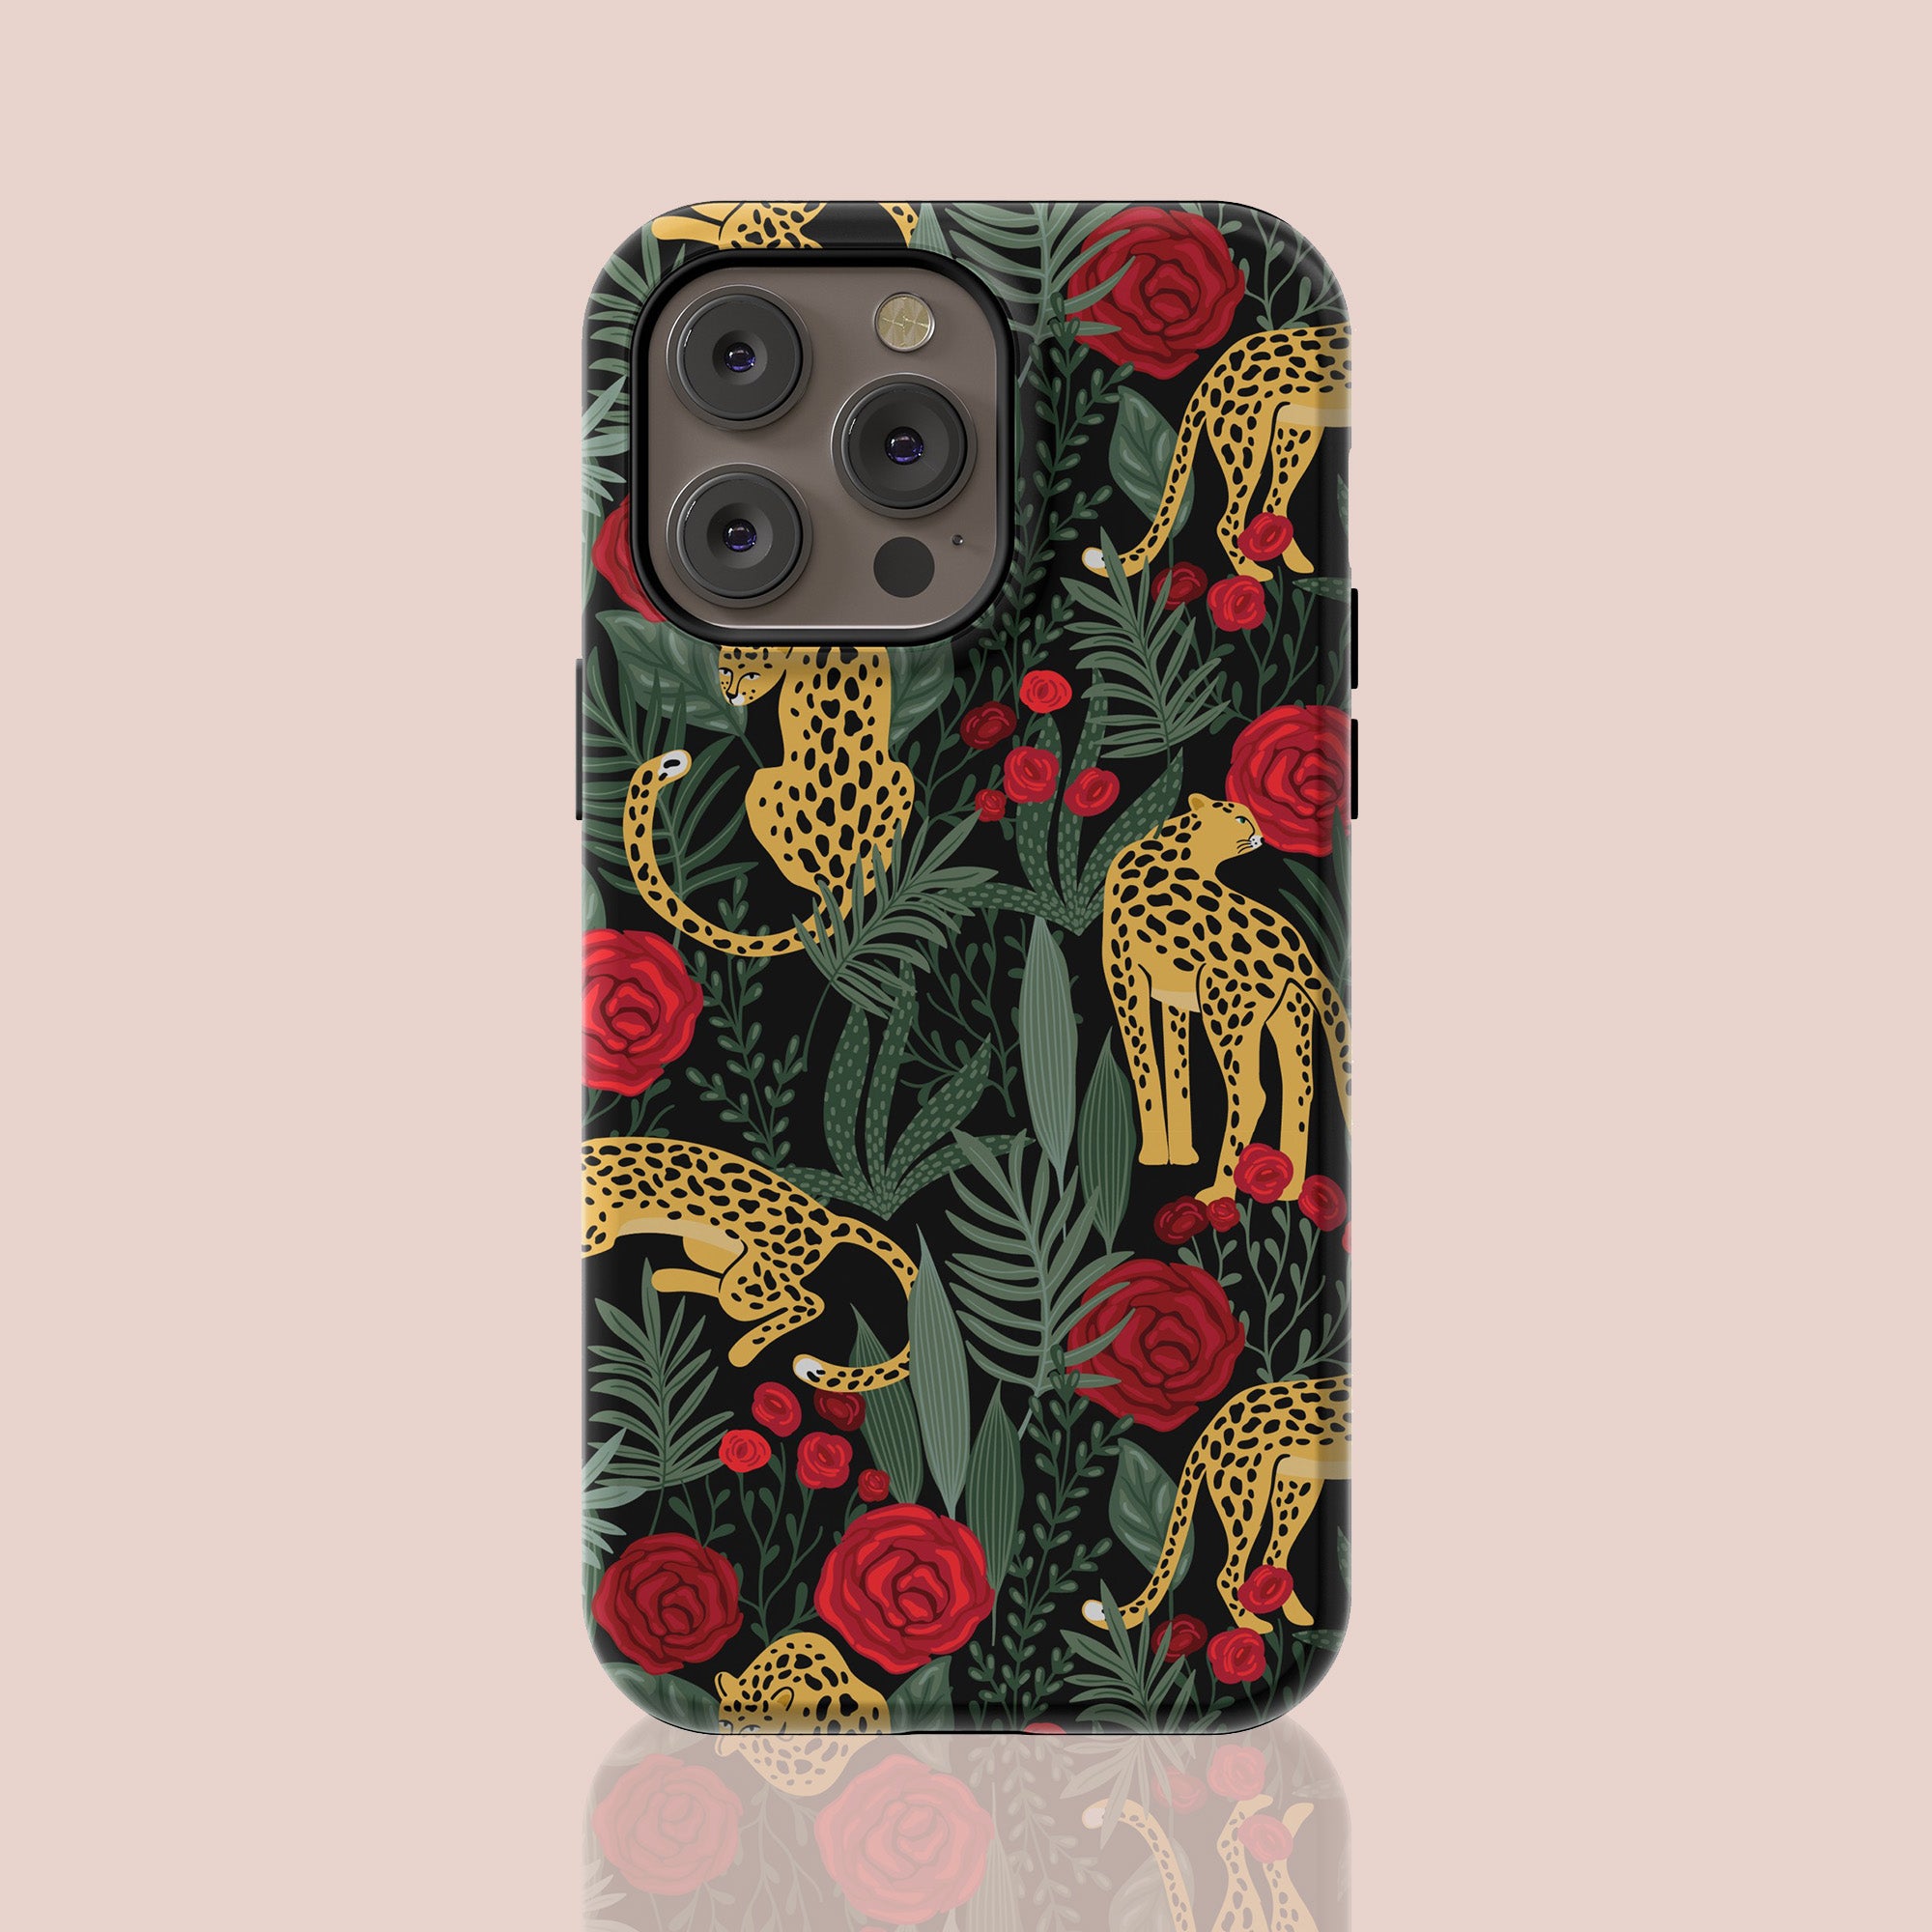 The Tropical Leopard Protective Phone Case, iPhone, Samsung